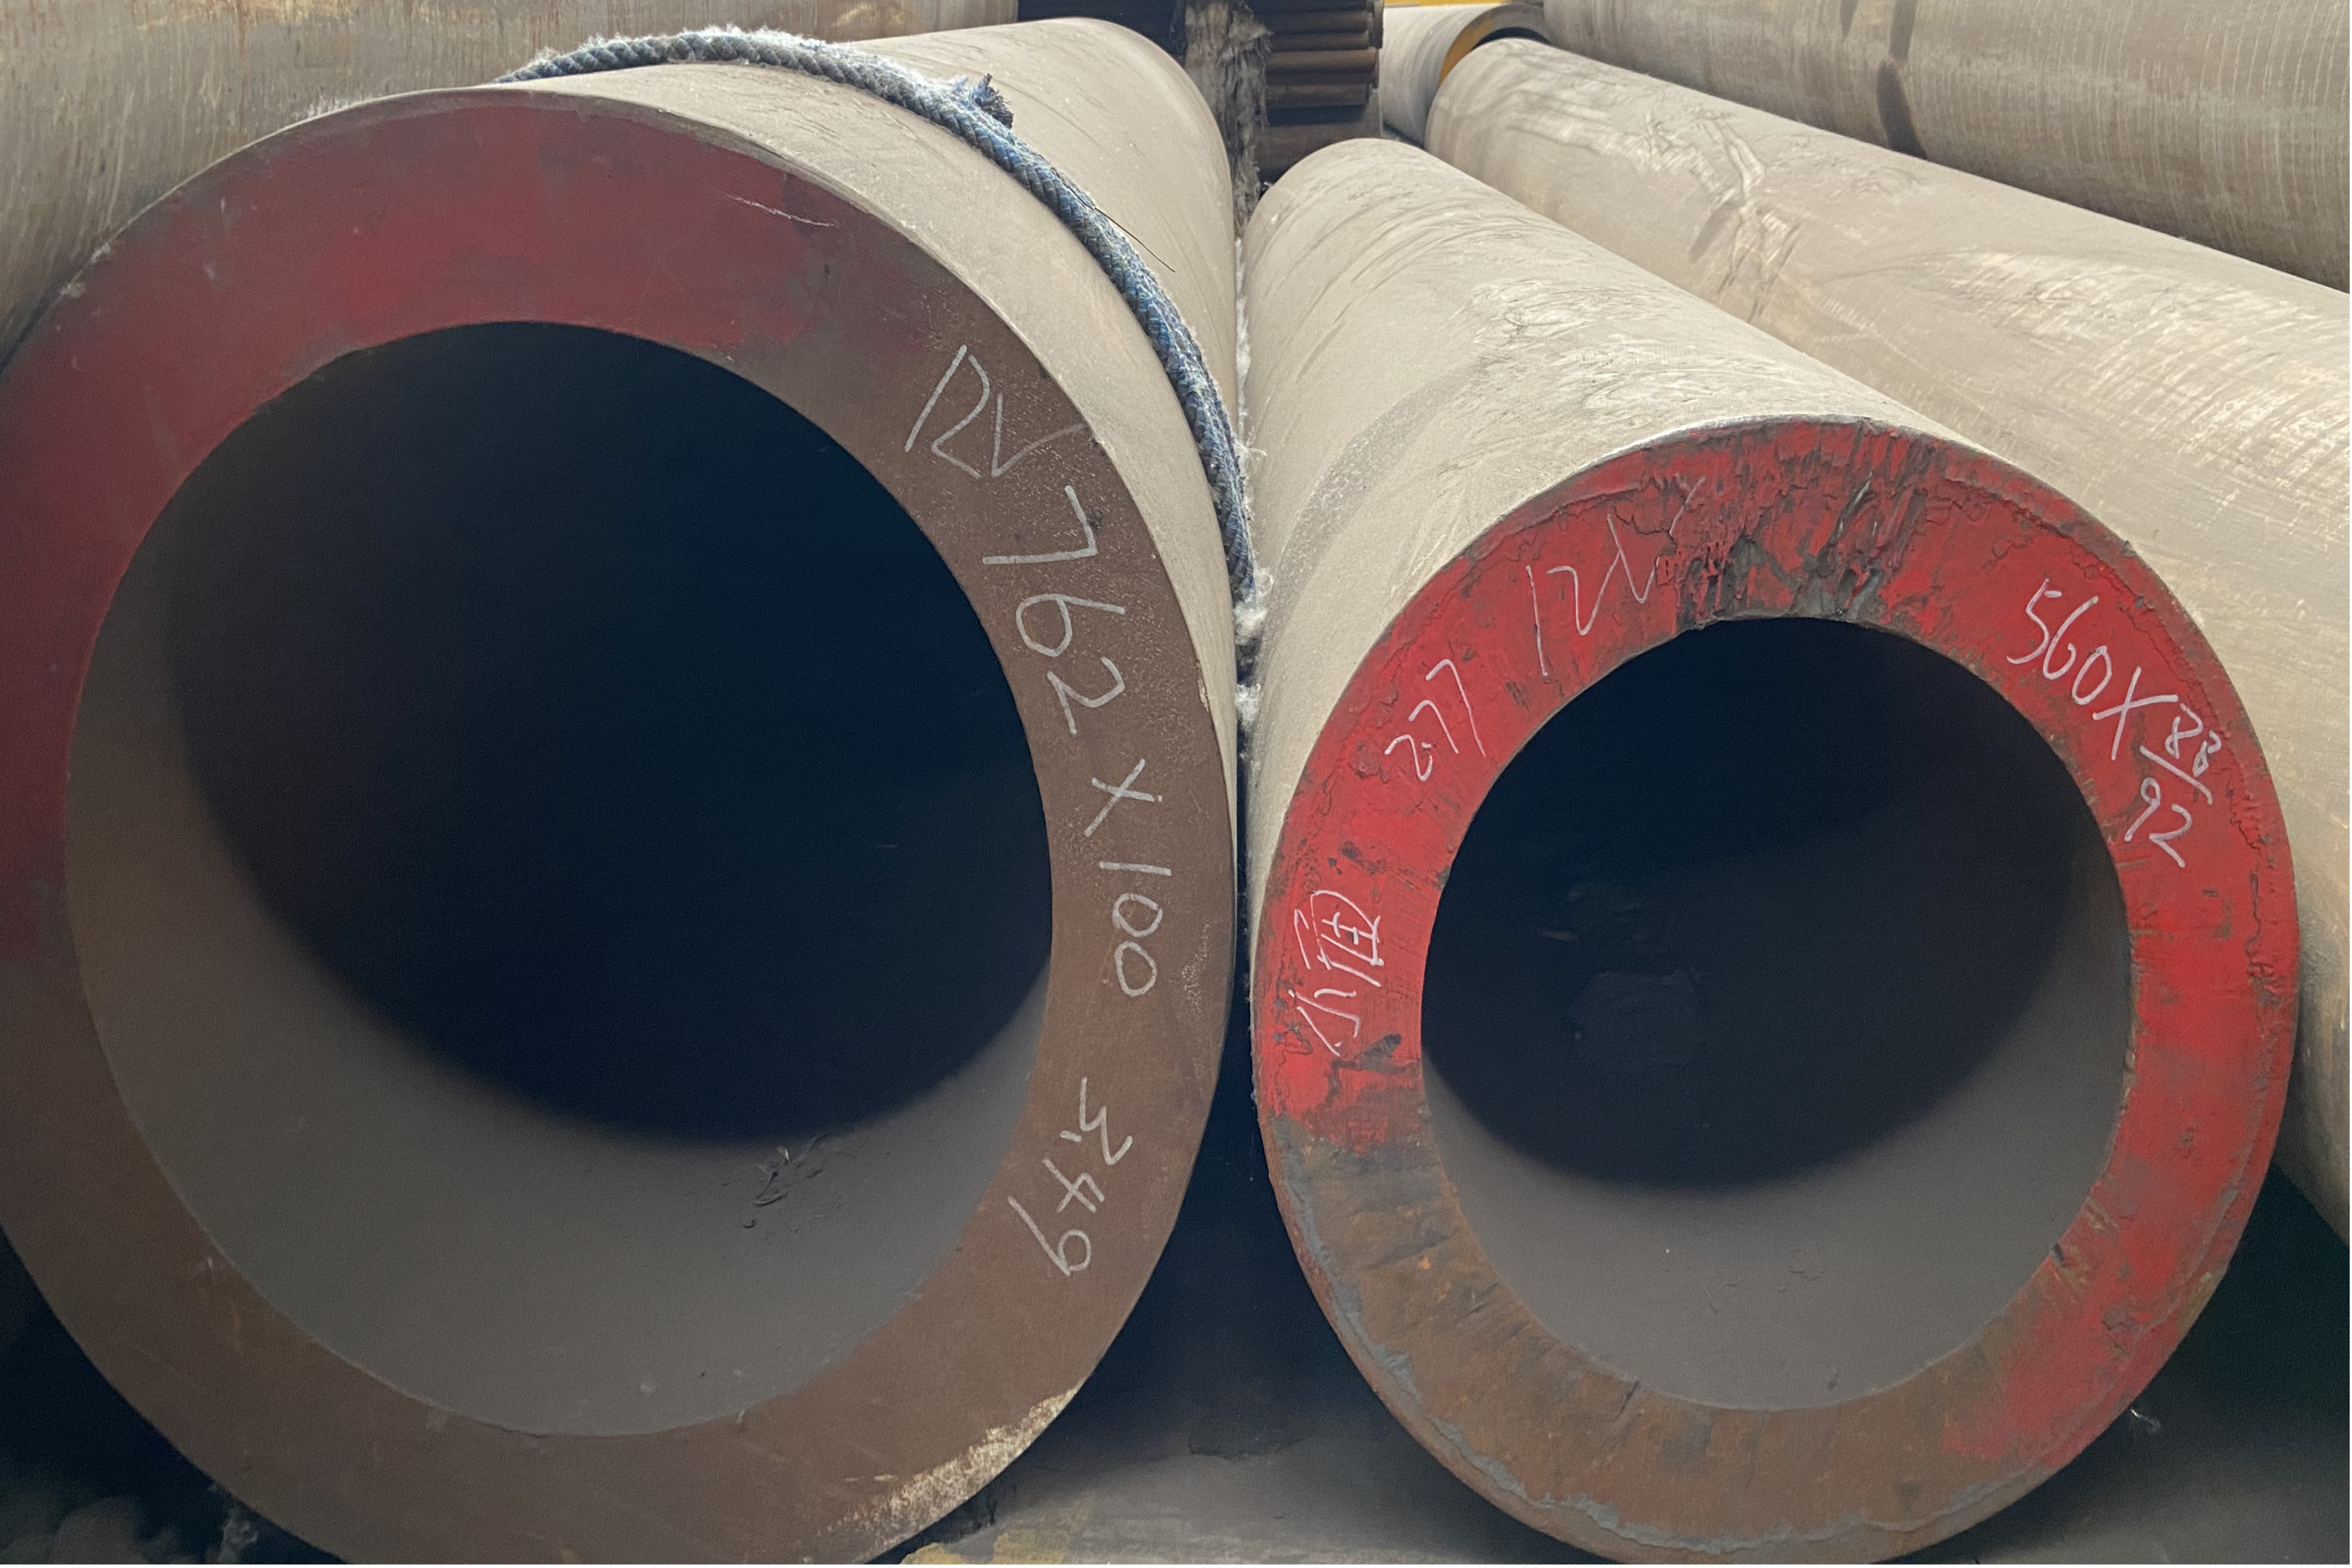 Thick-walled steel pipe